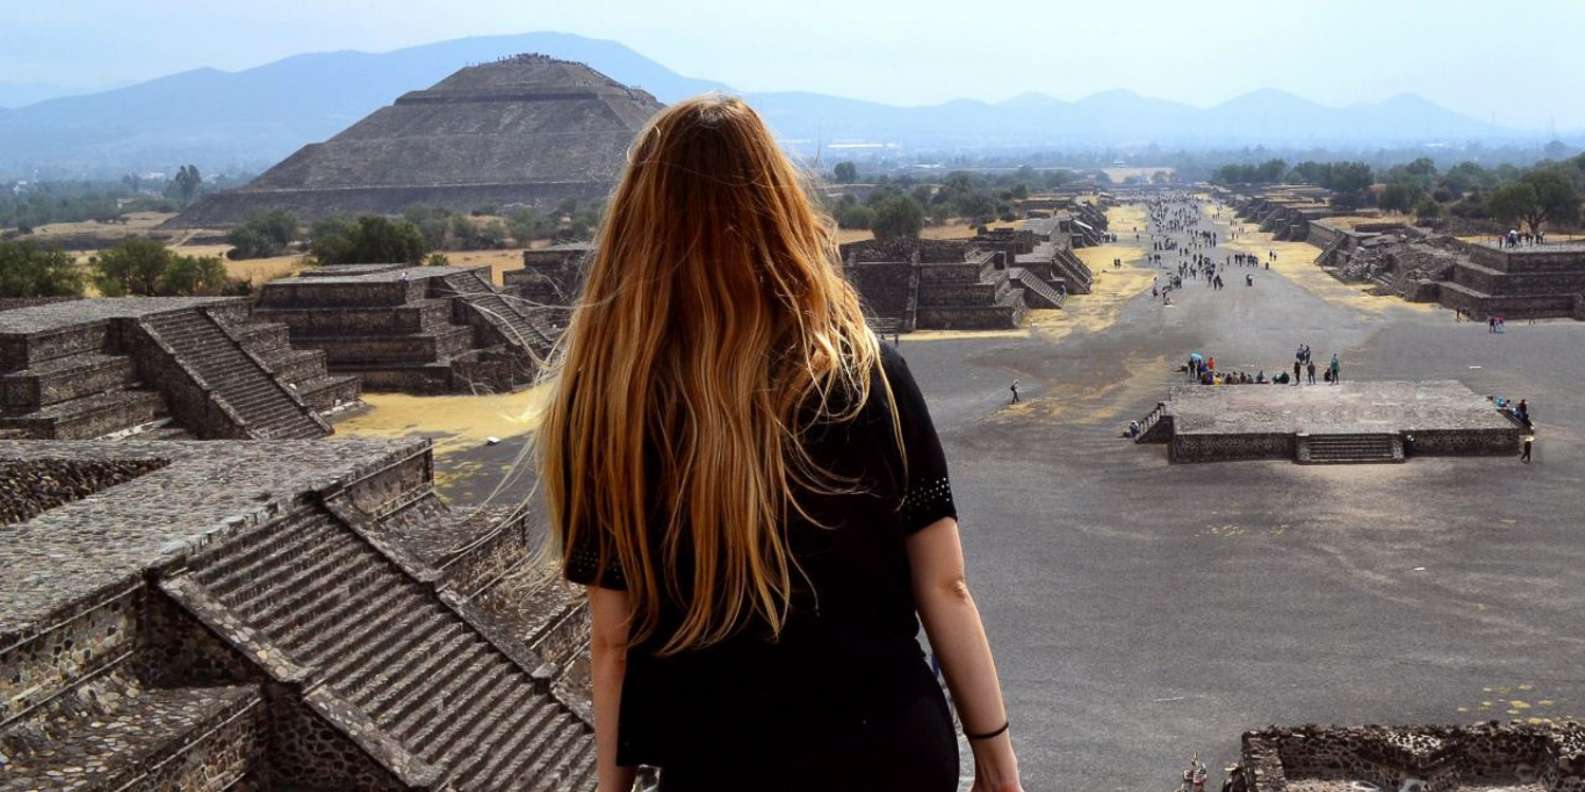 Mexico City: Teotihuacan, Shrine of Guadalupe  Tlatelolco GetYourGuide